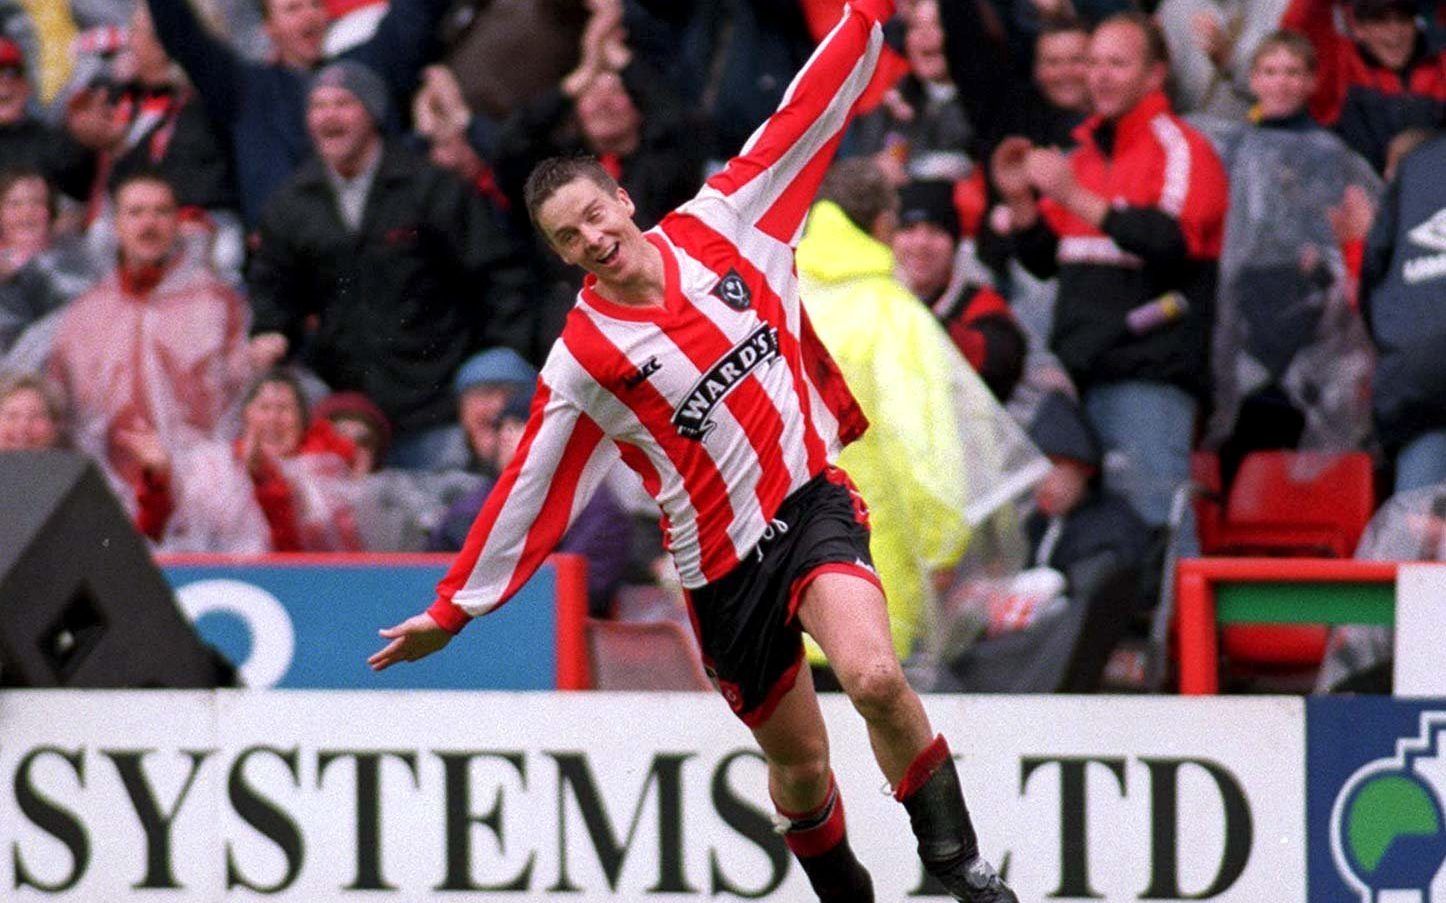 Sheff Utd v Ipswich, 10/5/97, Nationwide Division 1 Play-off Semi-final 1st leg 
Pic : John Sibley / Action Images  
Sheff Utd's Jan Aage Fjortoft celebrates after scoring the opening goal 
stock 
Sheffield United 
Ipswich Town